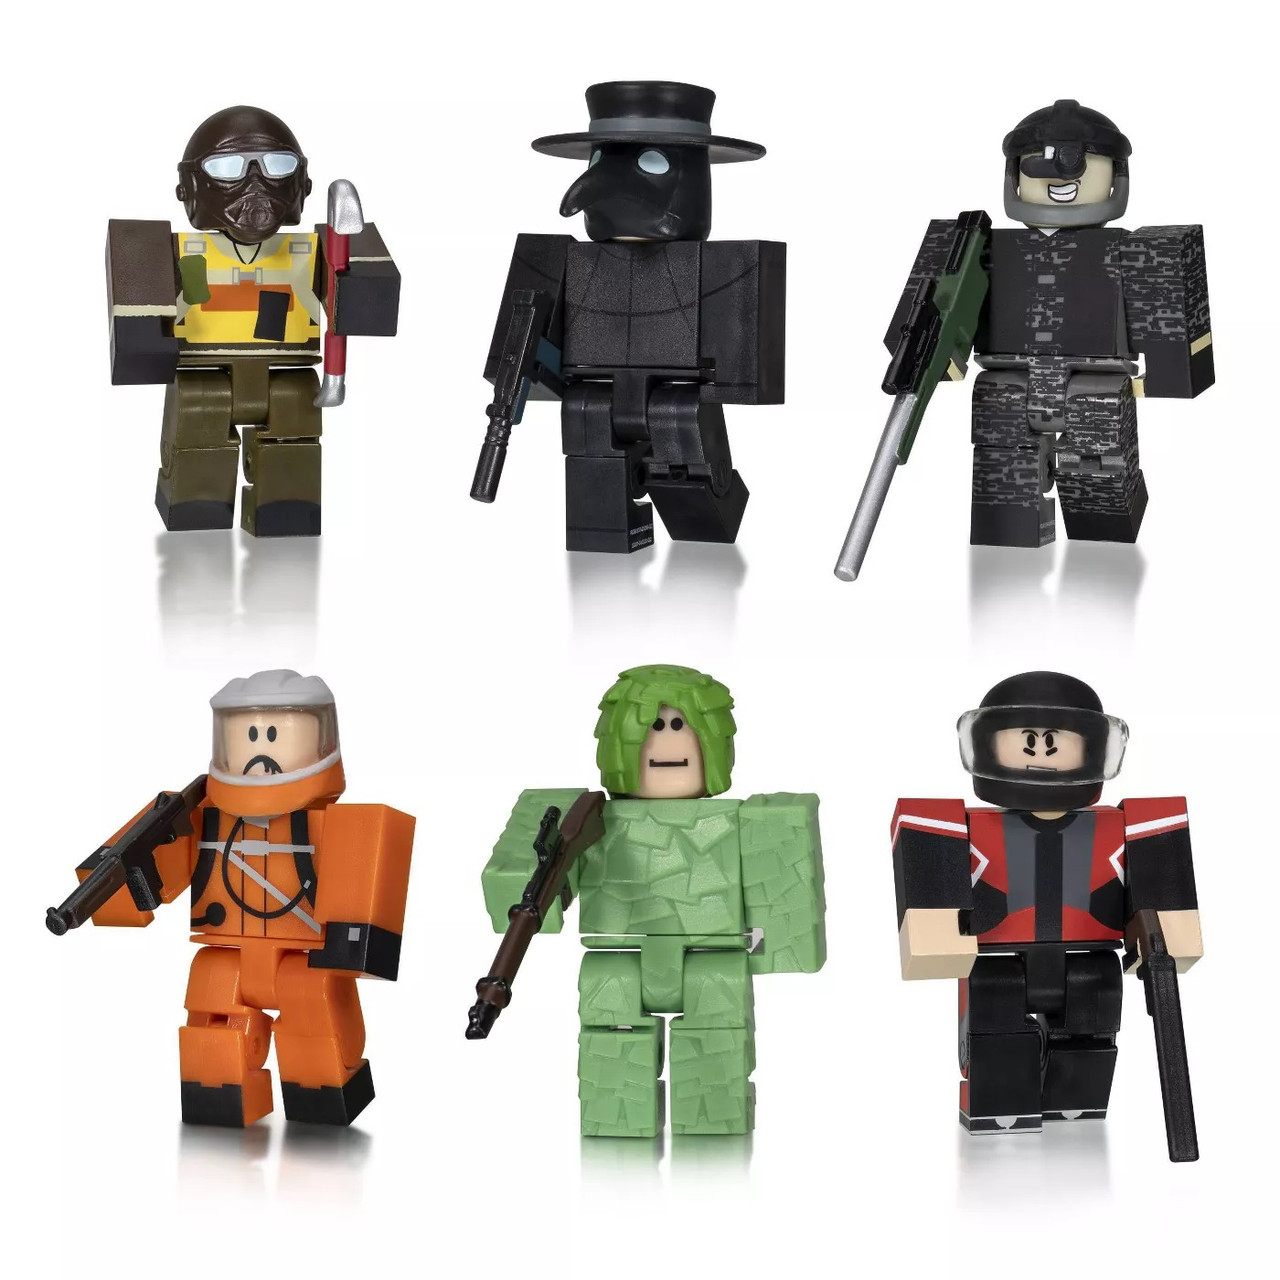 Roblox Apocalypse Rising 2 Six Figure Pack Includes Exclusive Virtual Item Buy At Not Just Toyz - roblox the living dead how to open crates